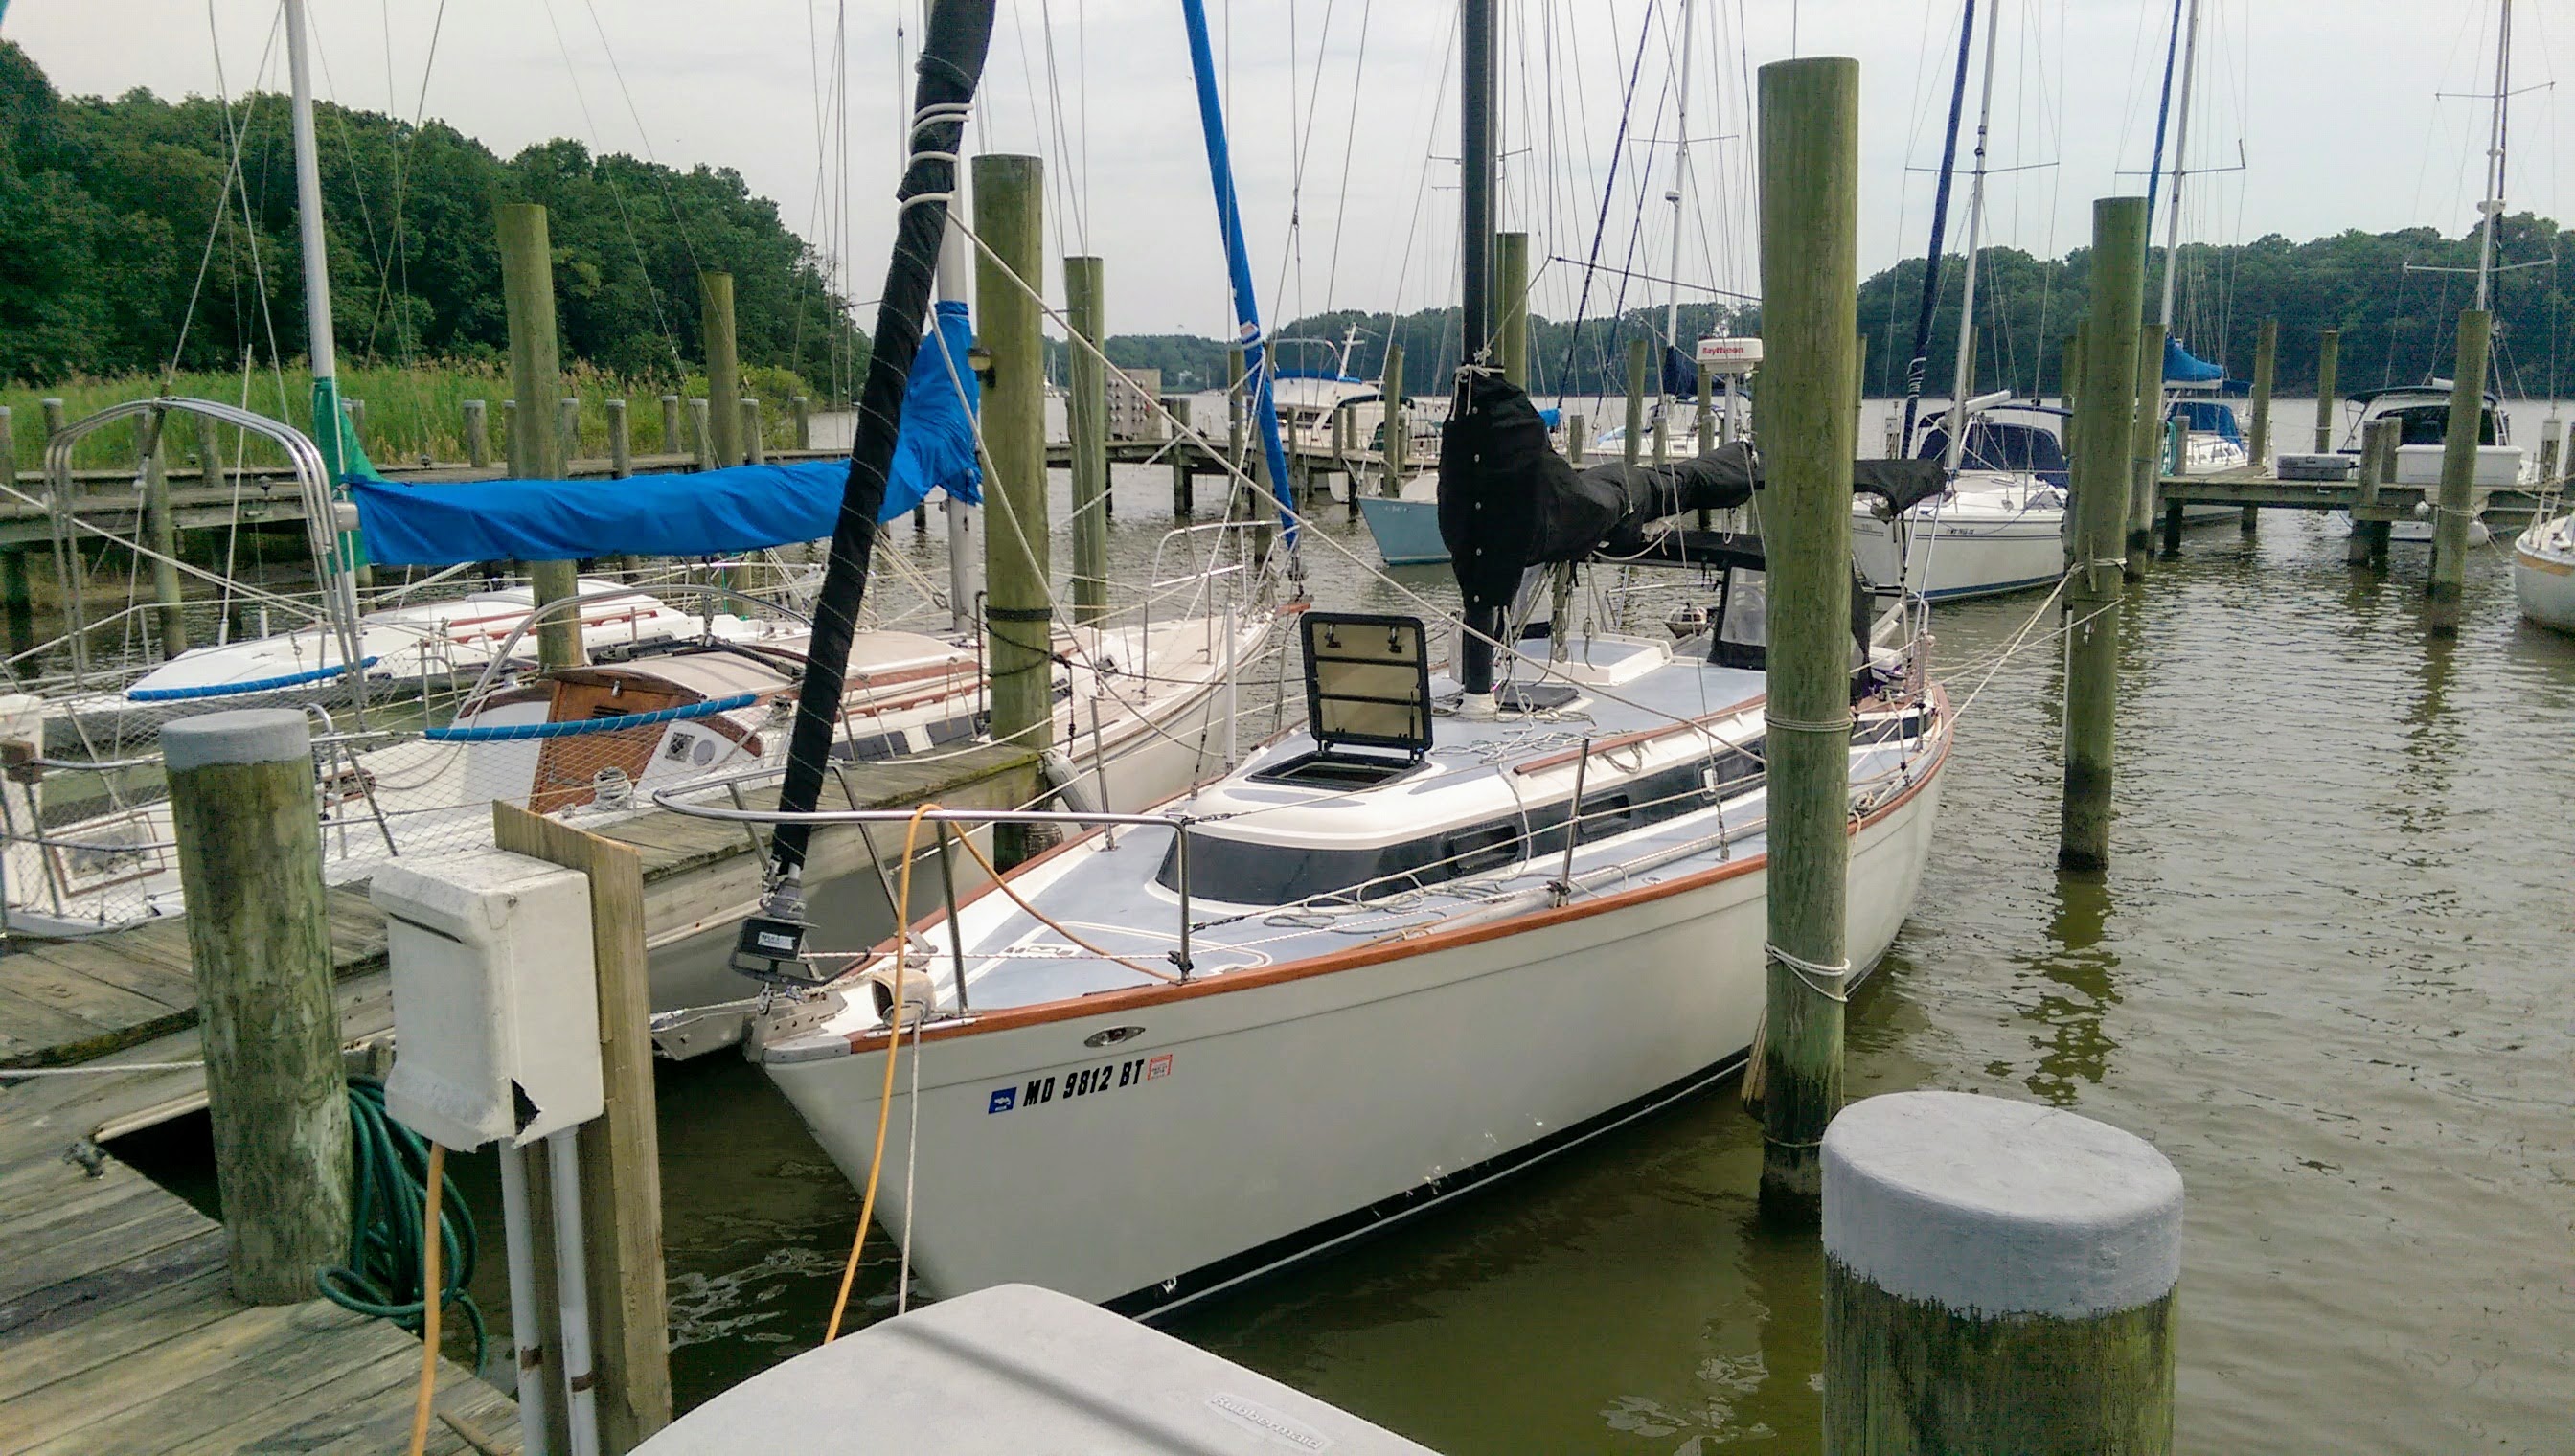 1981 32 foot Pearson Sloop Sailboat for sale in Lynch, MD - image 1 